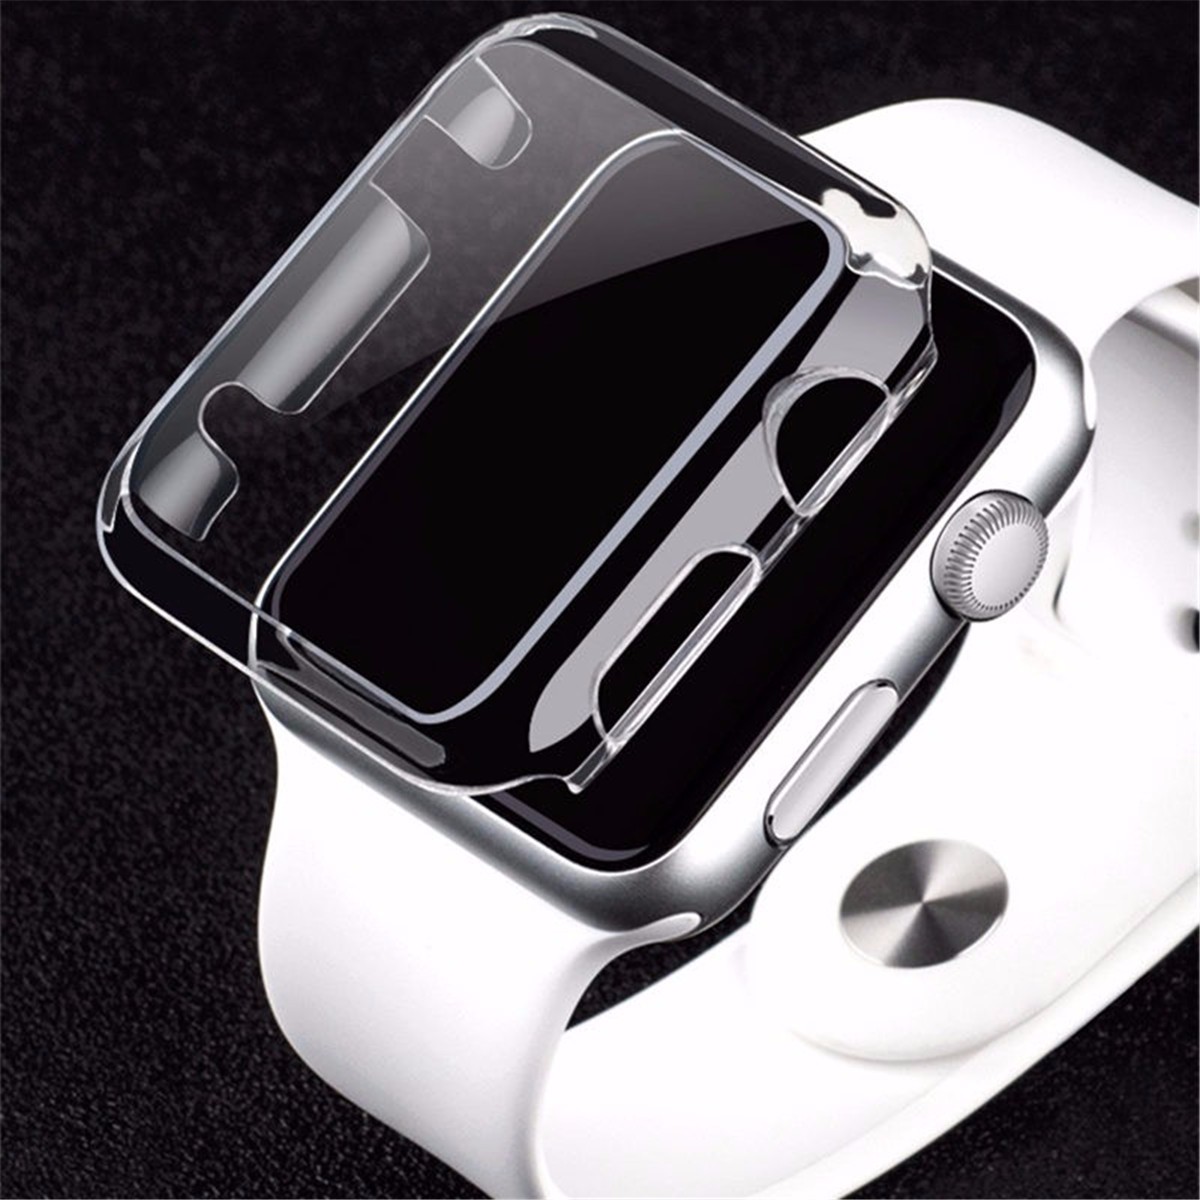 Transparent-Clear-Thin-Hard-Clip-On-Case-Cover-Screen-Protector-For-3842mm-Apple-Watch-1-1107650-1